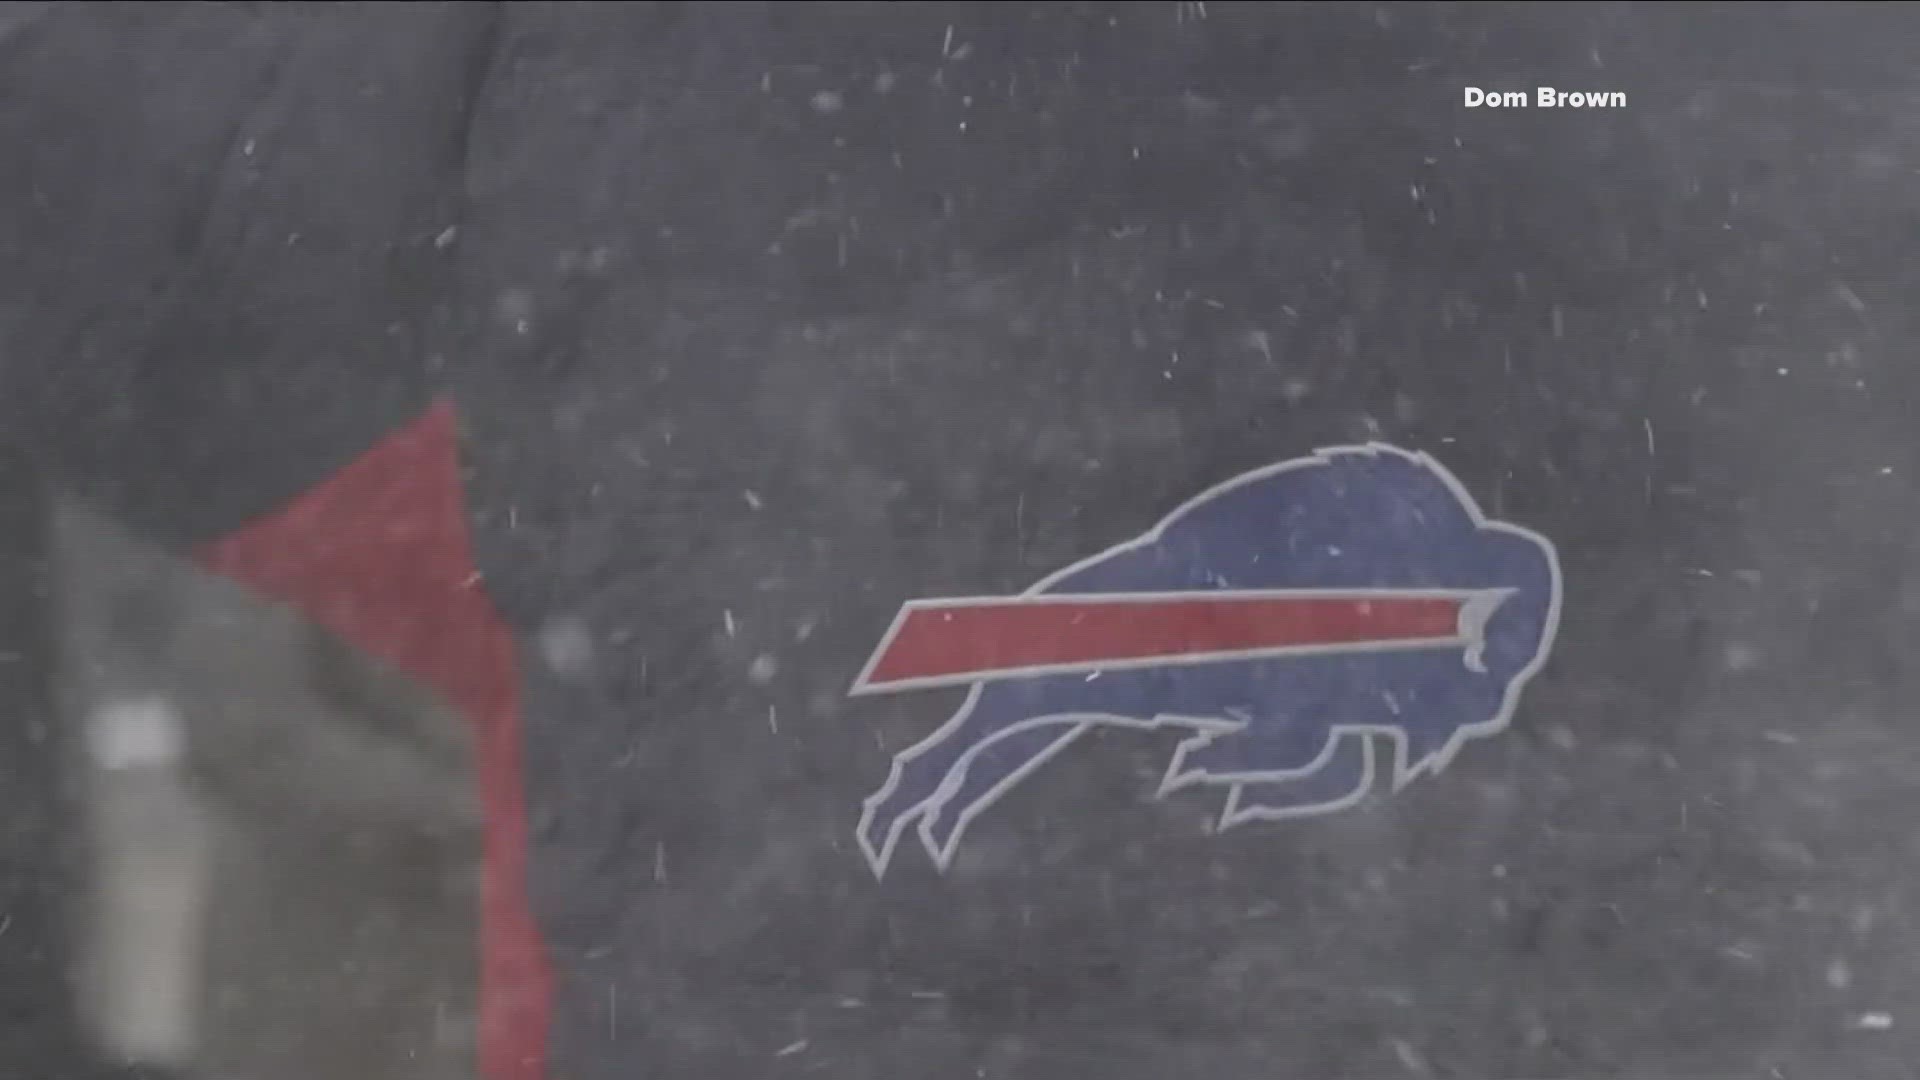 You can add another hype-anthem to add to your collection as you cheer on the Buffalo Bills. The artist is Dom Brown.